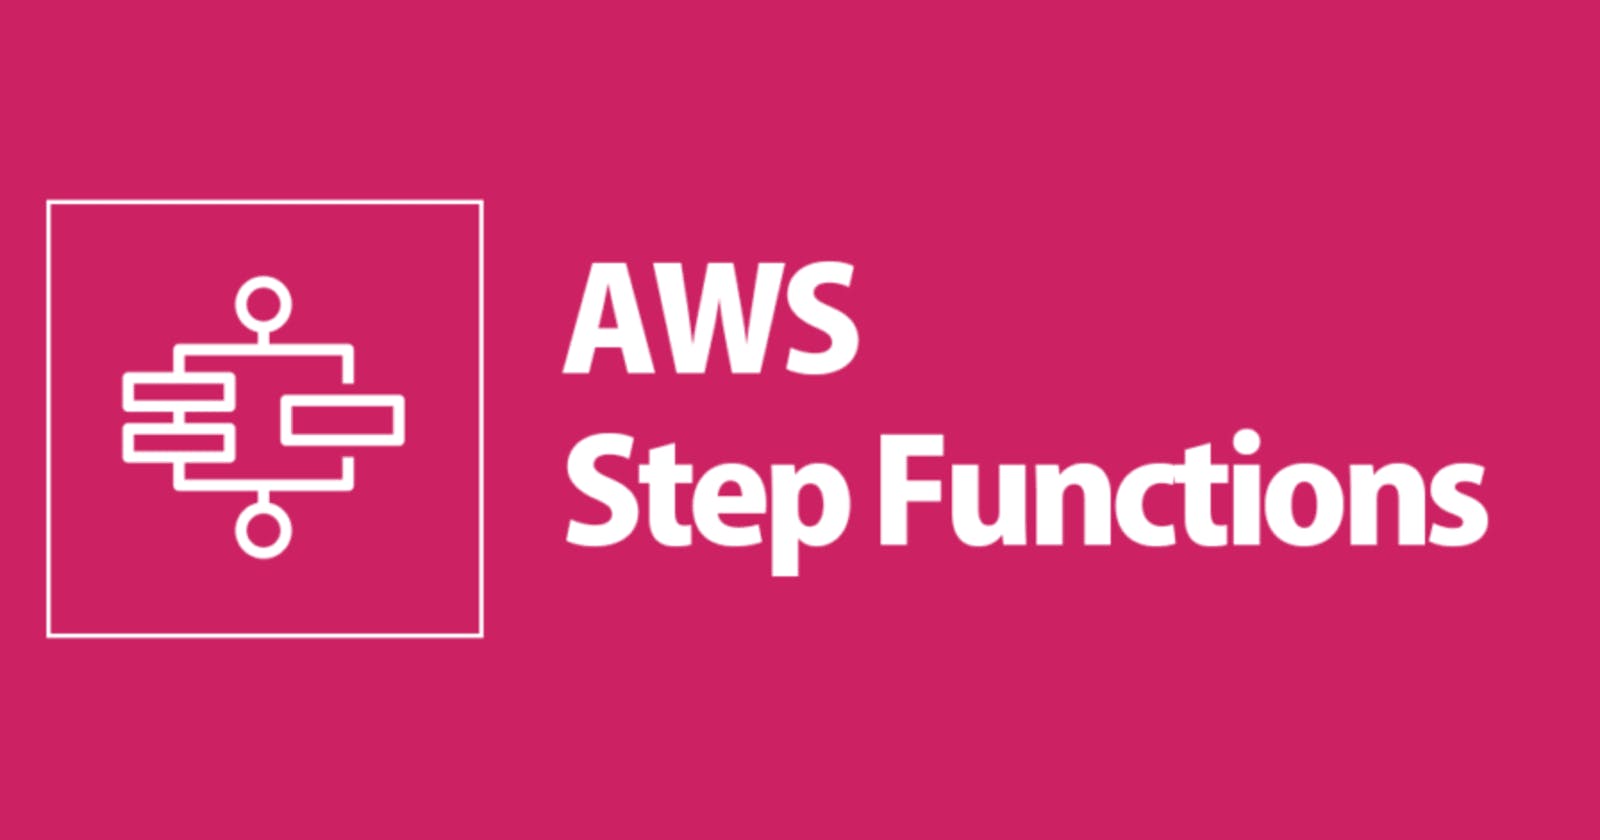 "AWS Step Functions: Orchestrating Workflows with Precision and Simplicity"